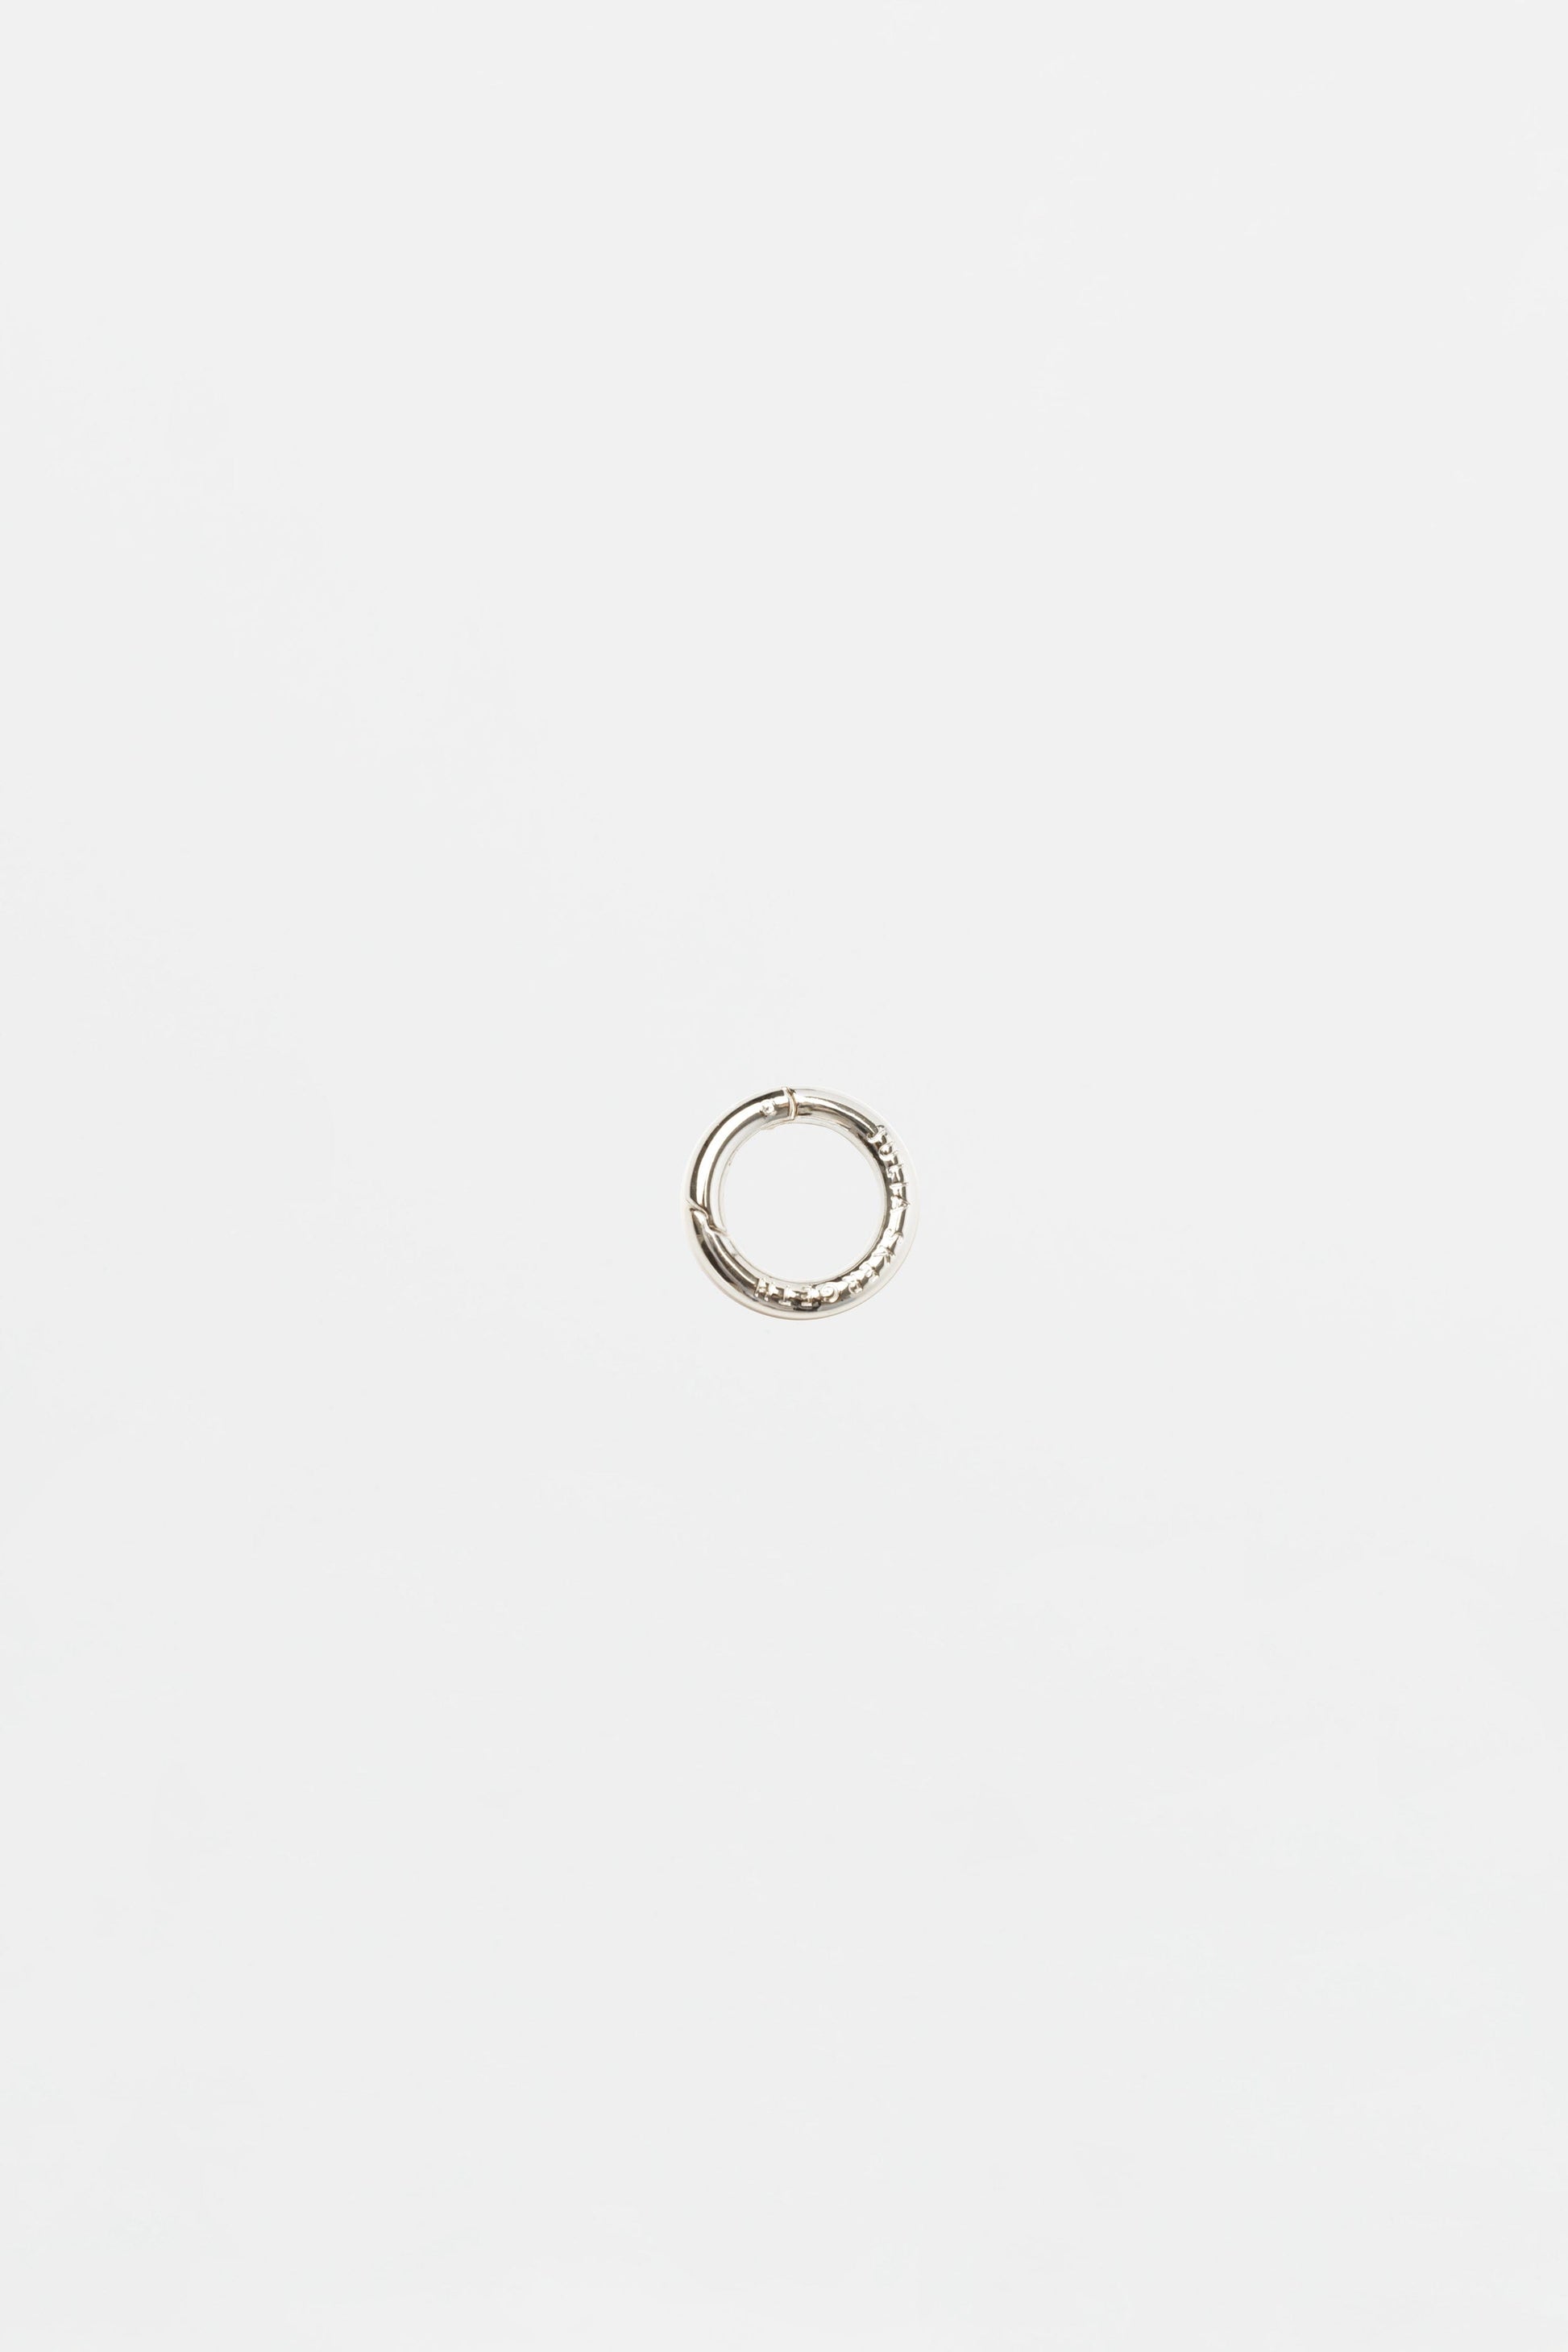 The Clip-On Ring Silver - JULIA SKERGETH